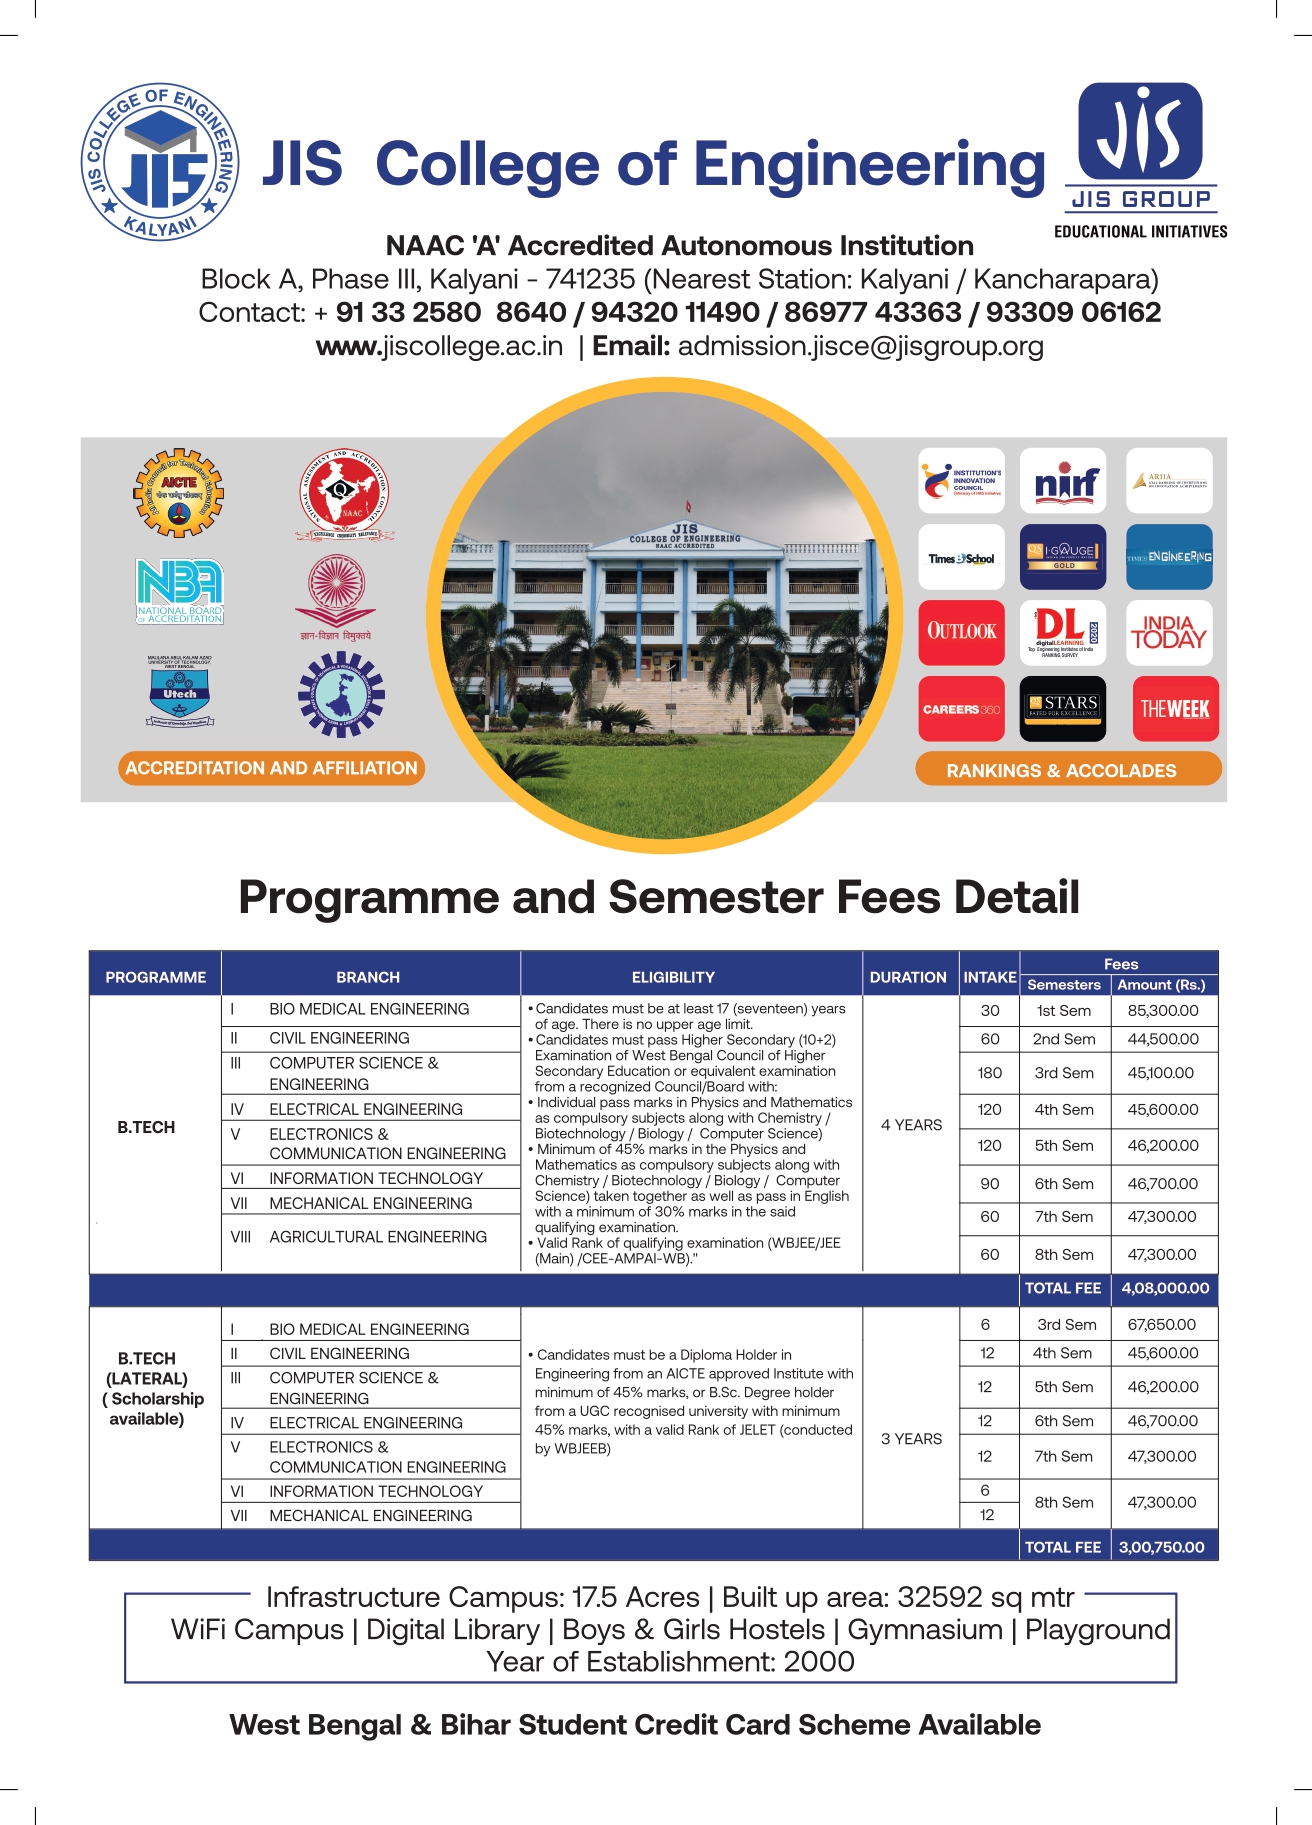 Admission Overview